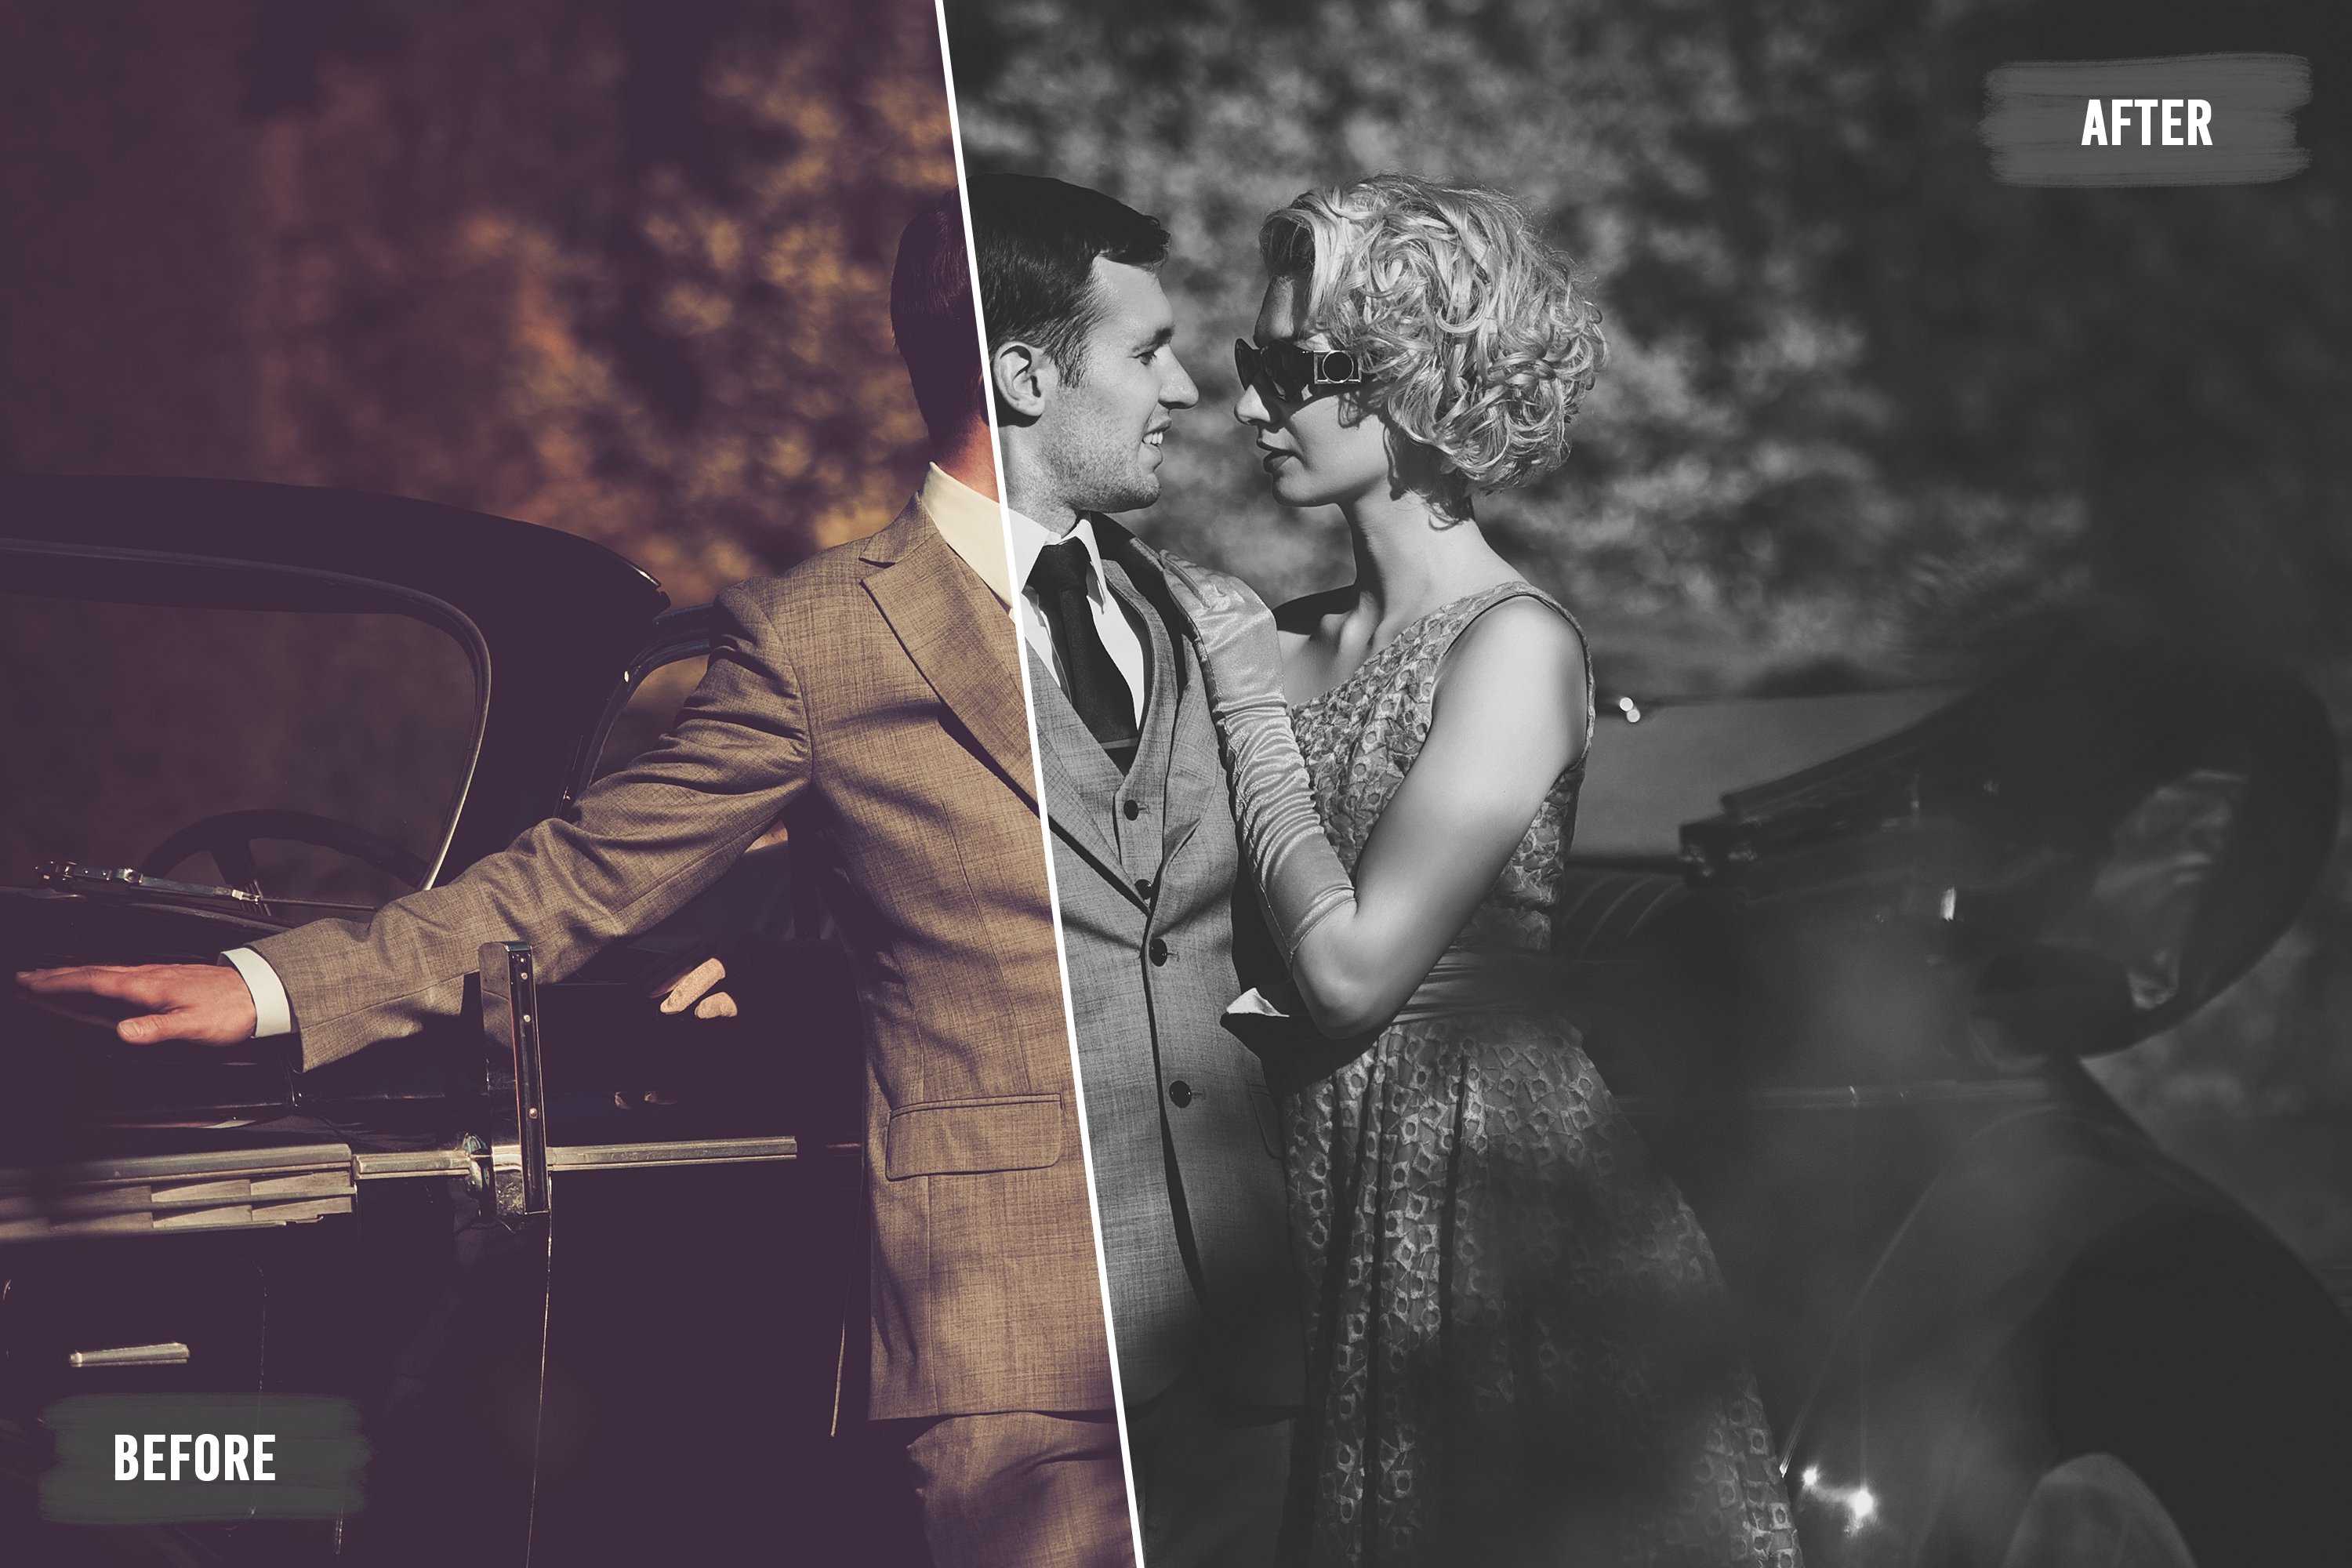 50 Film Noir LUTs Packpreview image.